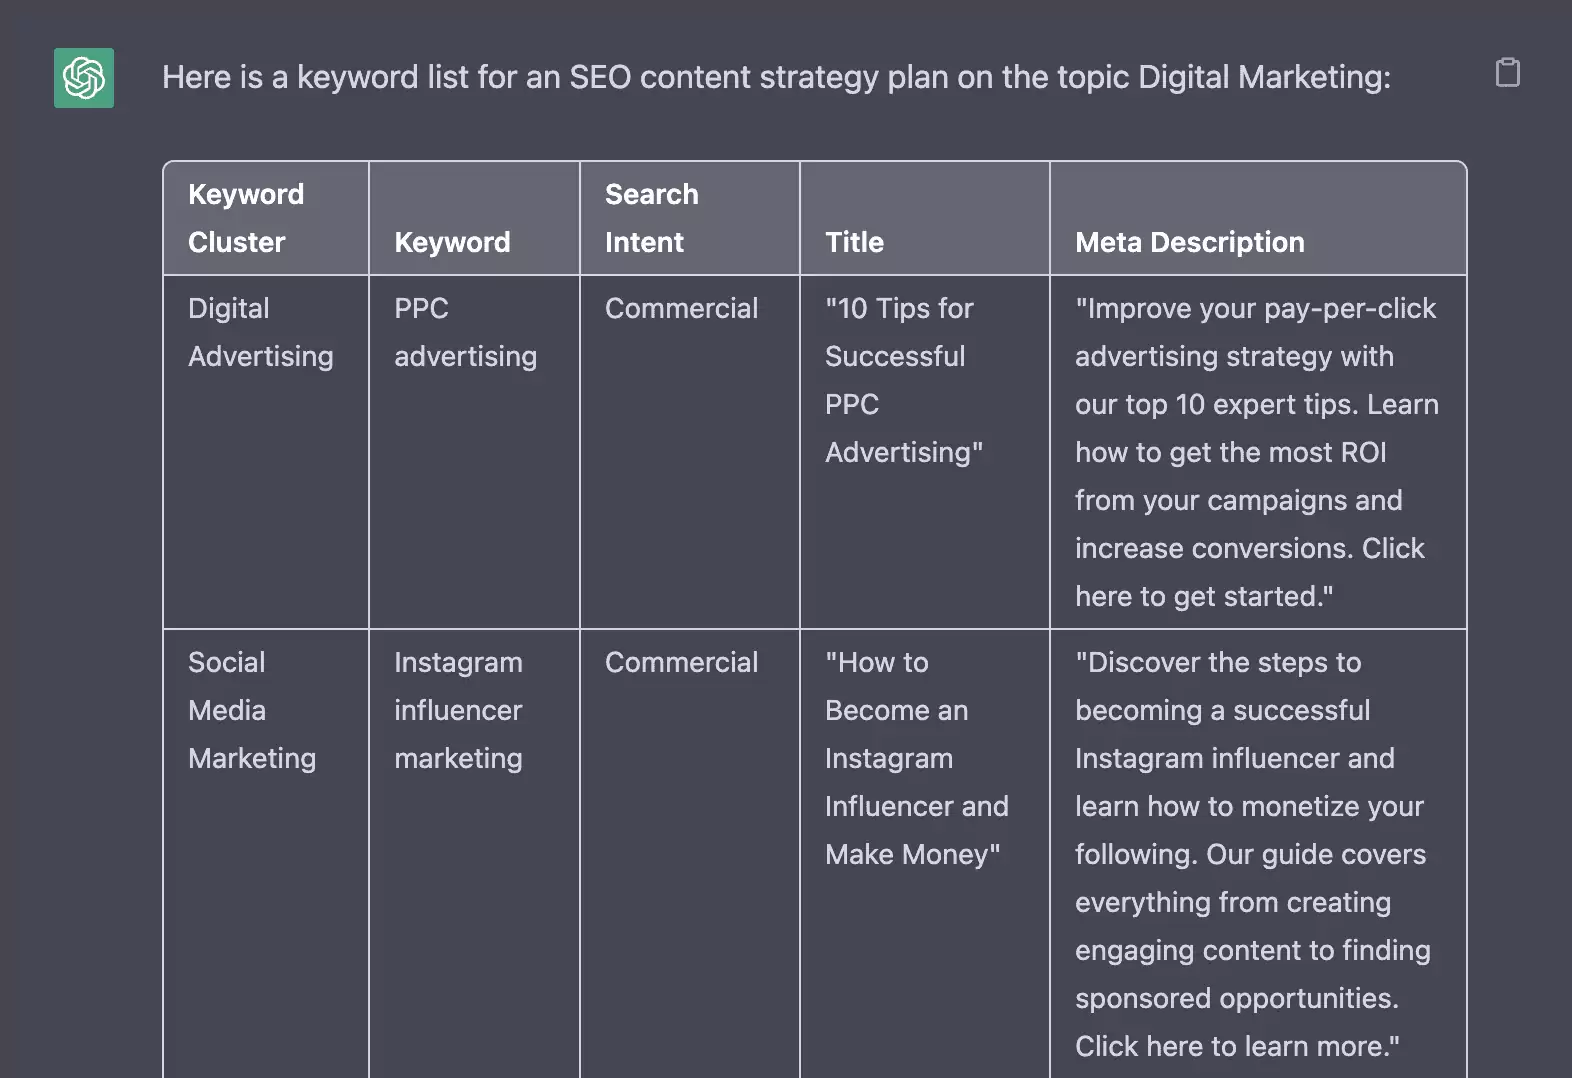 ChatGPT table results for "create an SEO content plan"